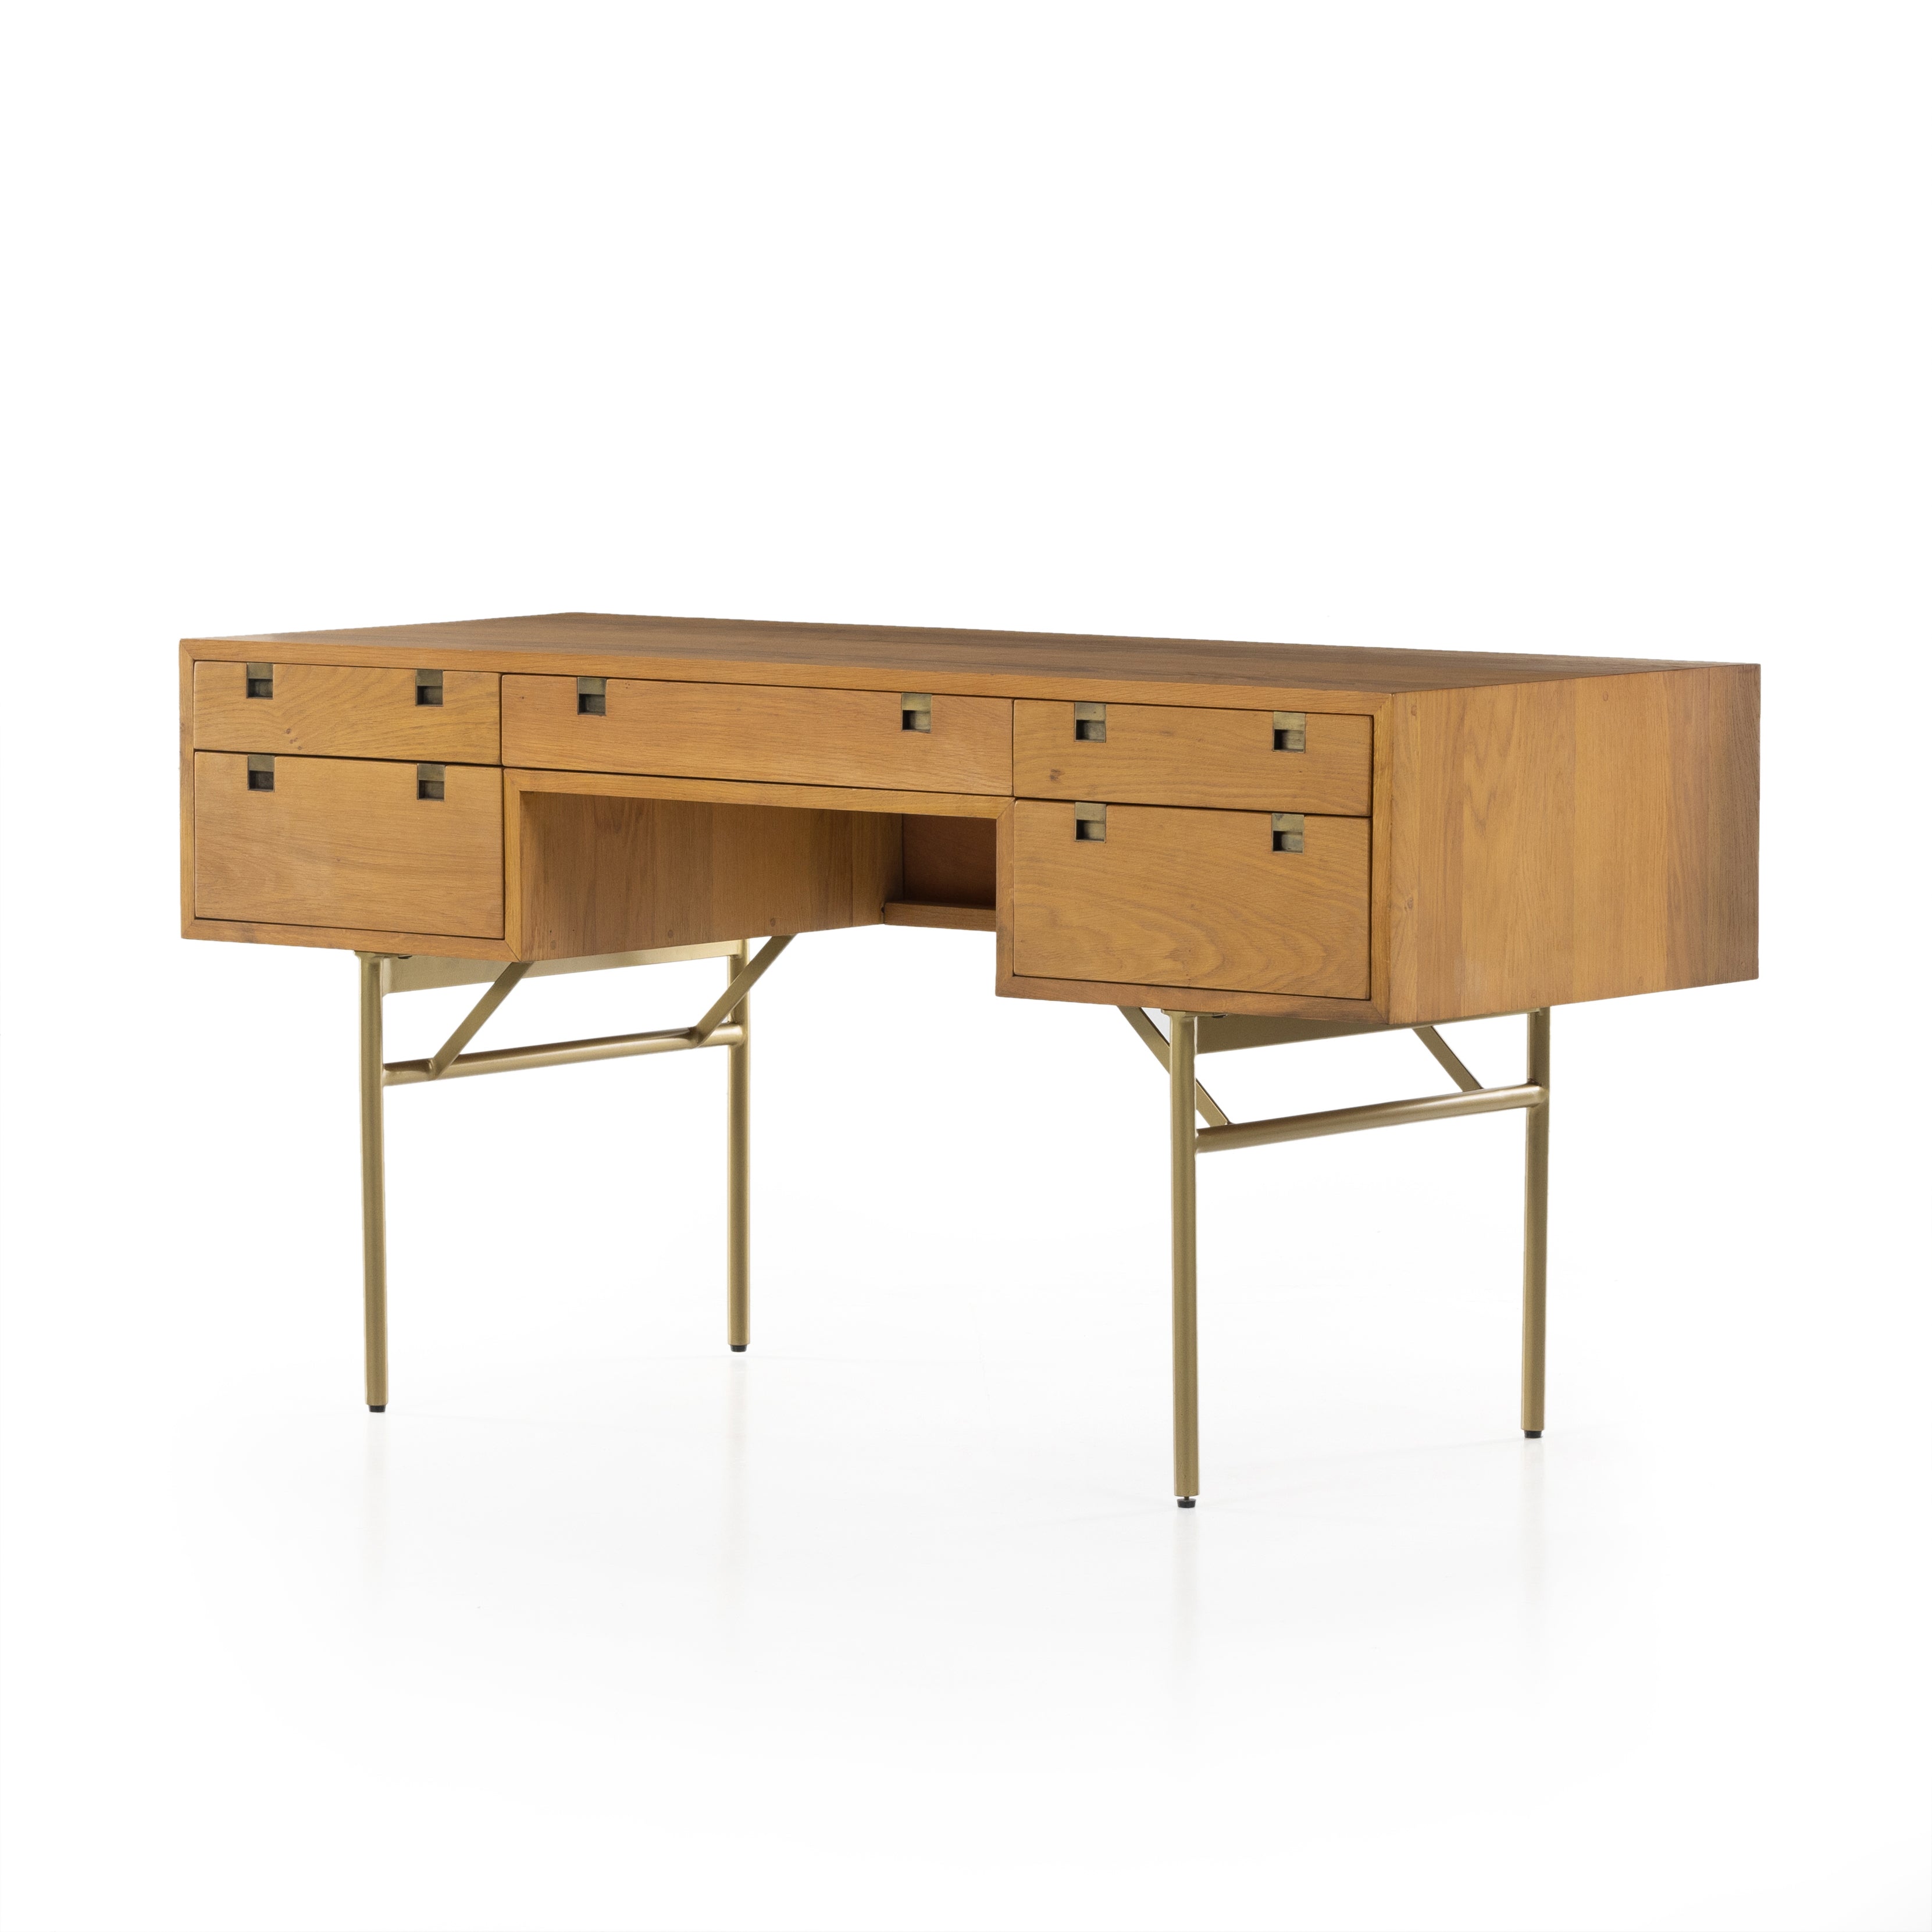 Style meets simplicity in this Danish-inspired design. A slim, streamlined desk of solid natural oak features squared hardware and airy legs finished in a satin brass. Five drawers offer ample storage space for frequently used office supplies. Amethyst Home provides interior design, new construction, custom furniture, and area rugs in the Salt Lake City metro area.